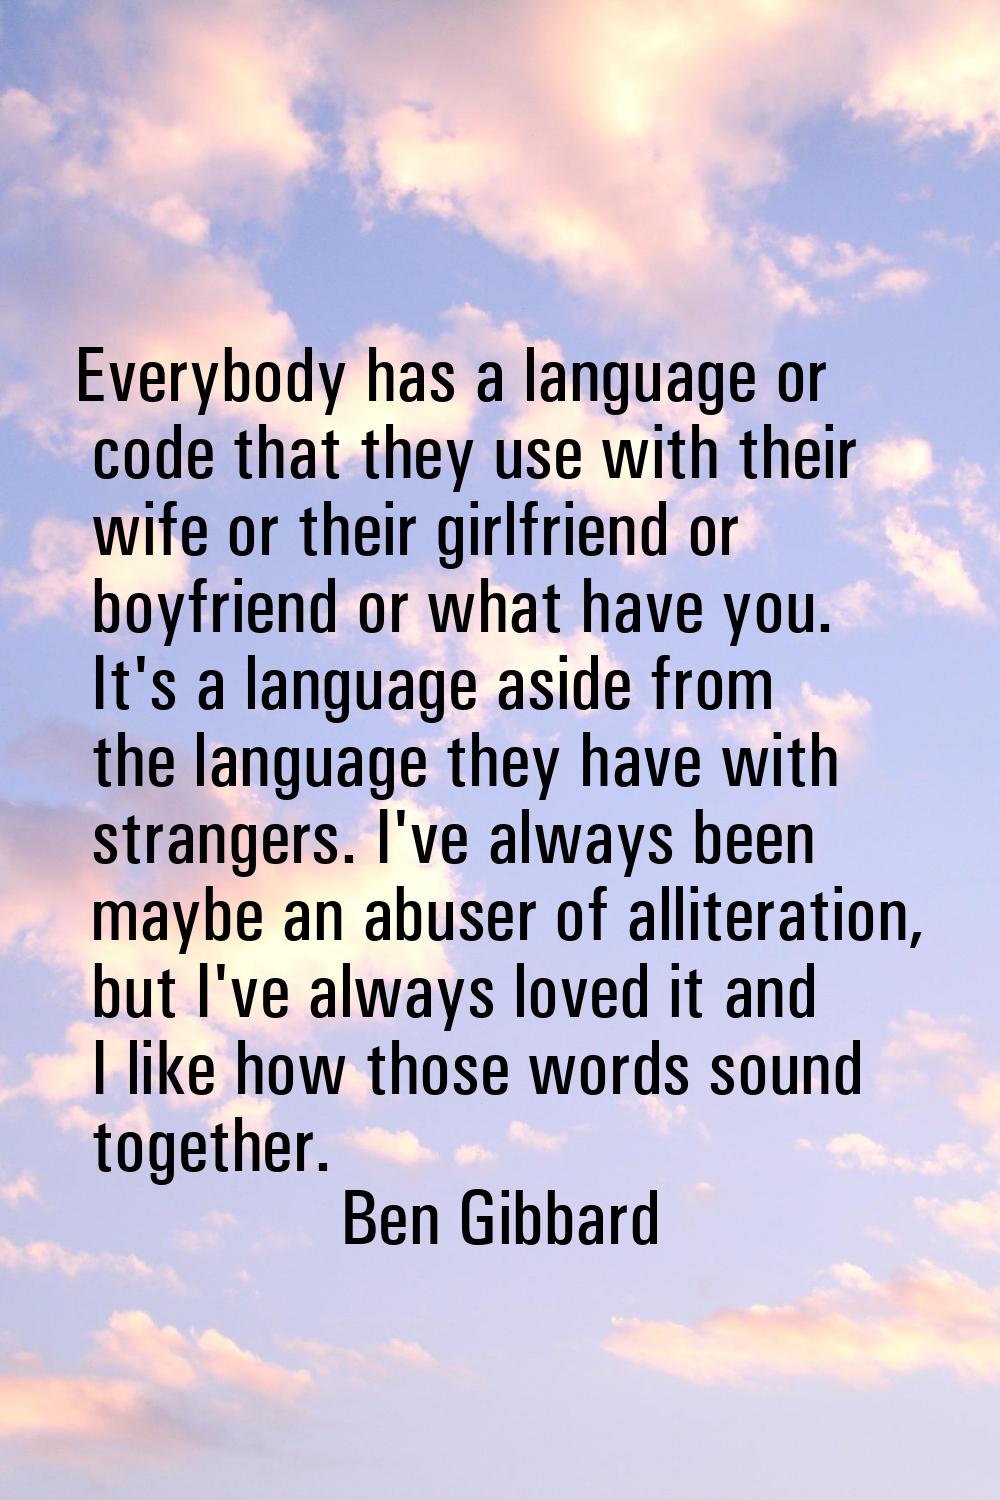 Everybody has a language or code that they use with their wife or their girlfriend or boyfriend or 